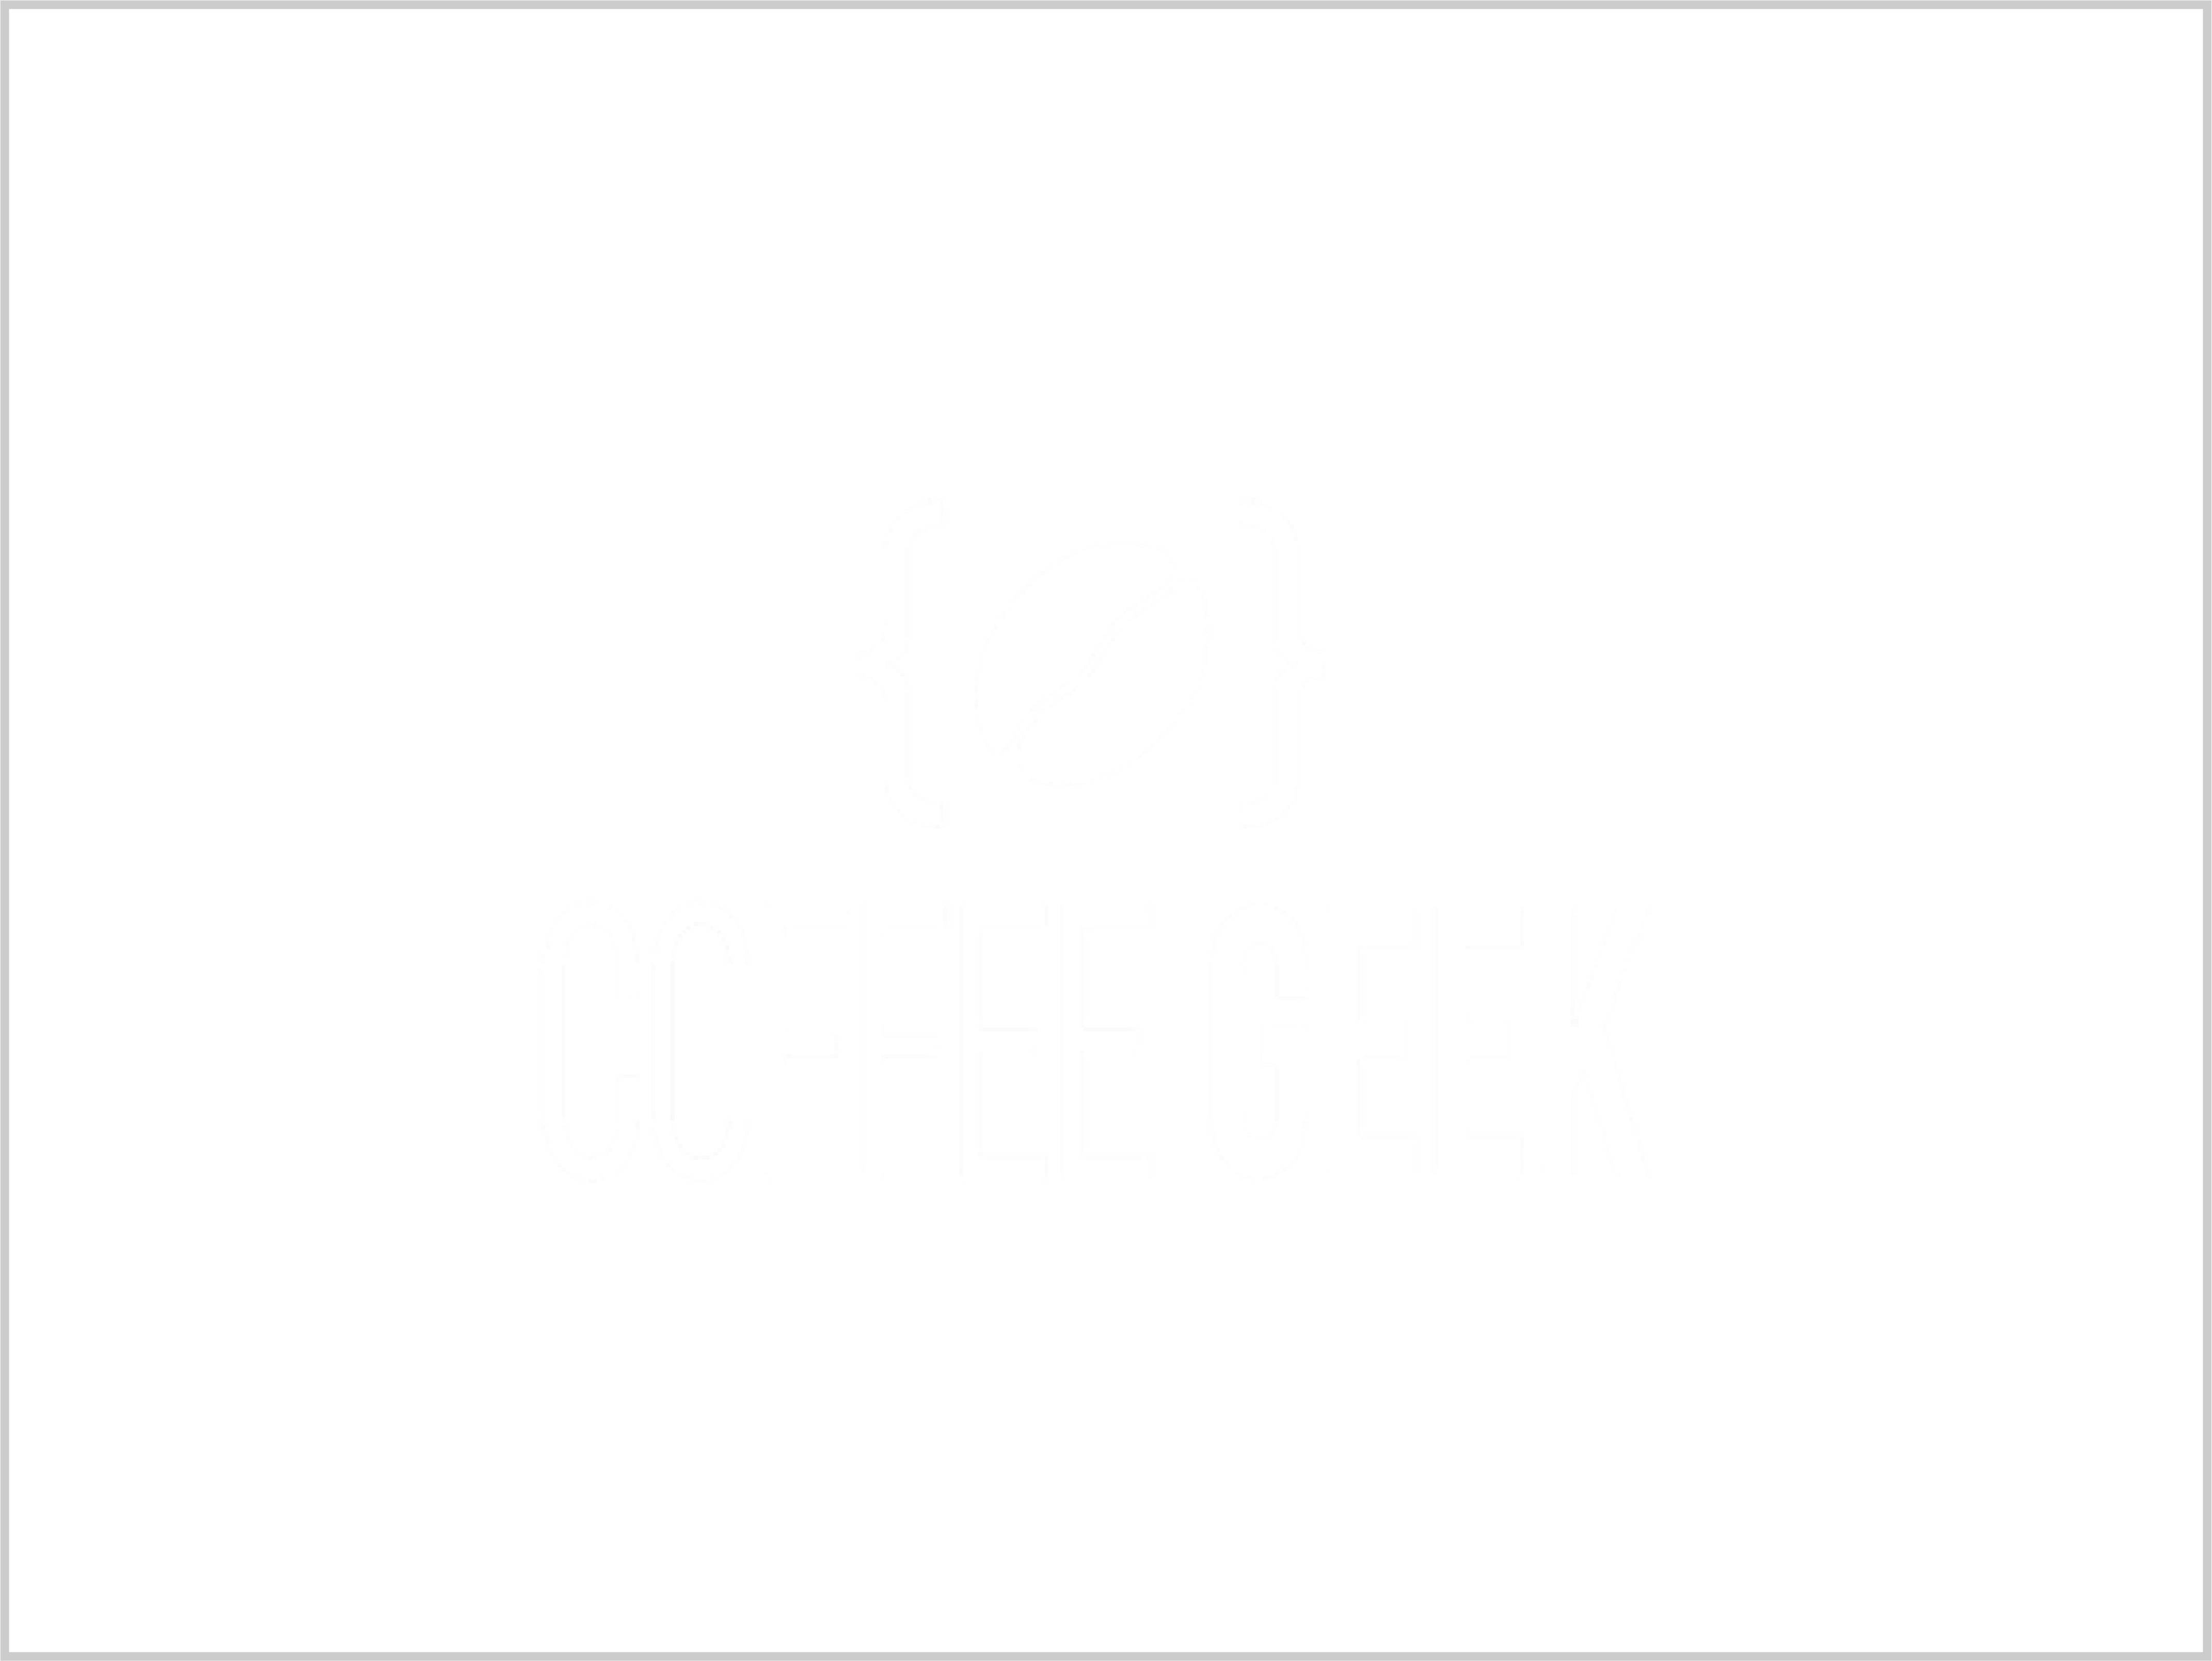 Bombshell client for content writing and editing, Coffee Geek